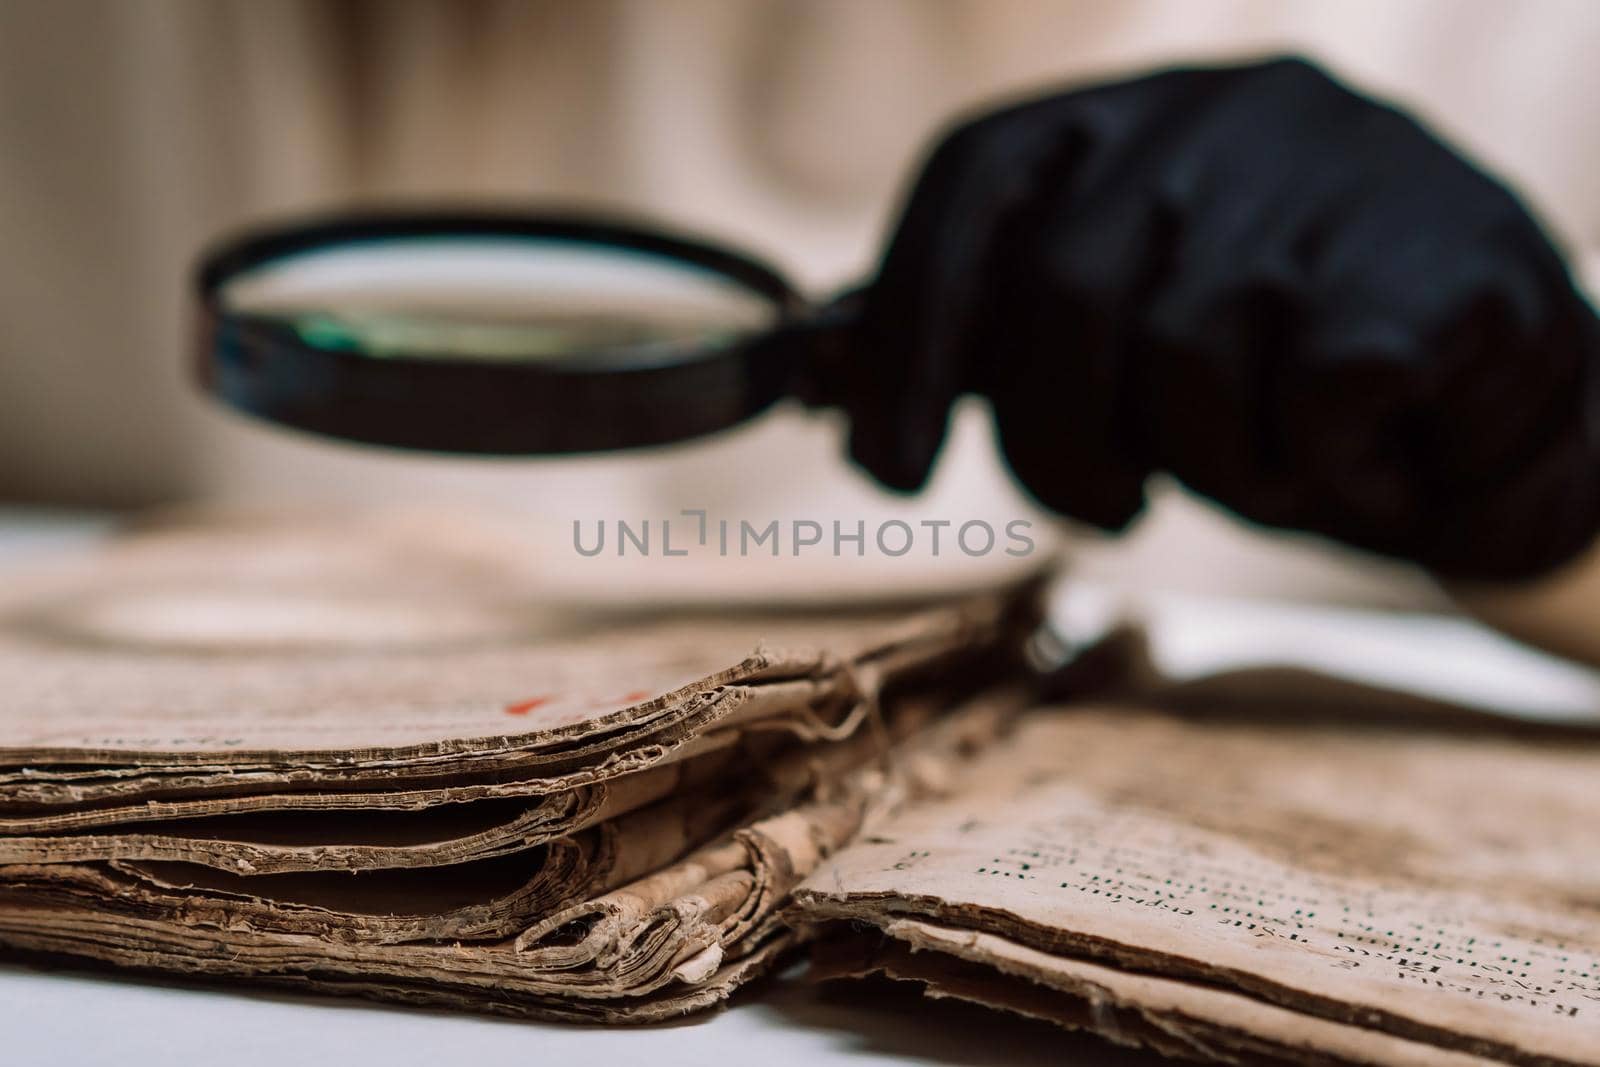 Historian scientist in gloves reading antique book with magnifying glass. Translation of religious literature. Manuscript with ancient writings. Treasures of the past. Museum piece. High quality